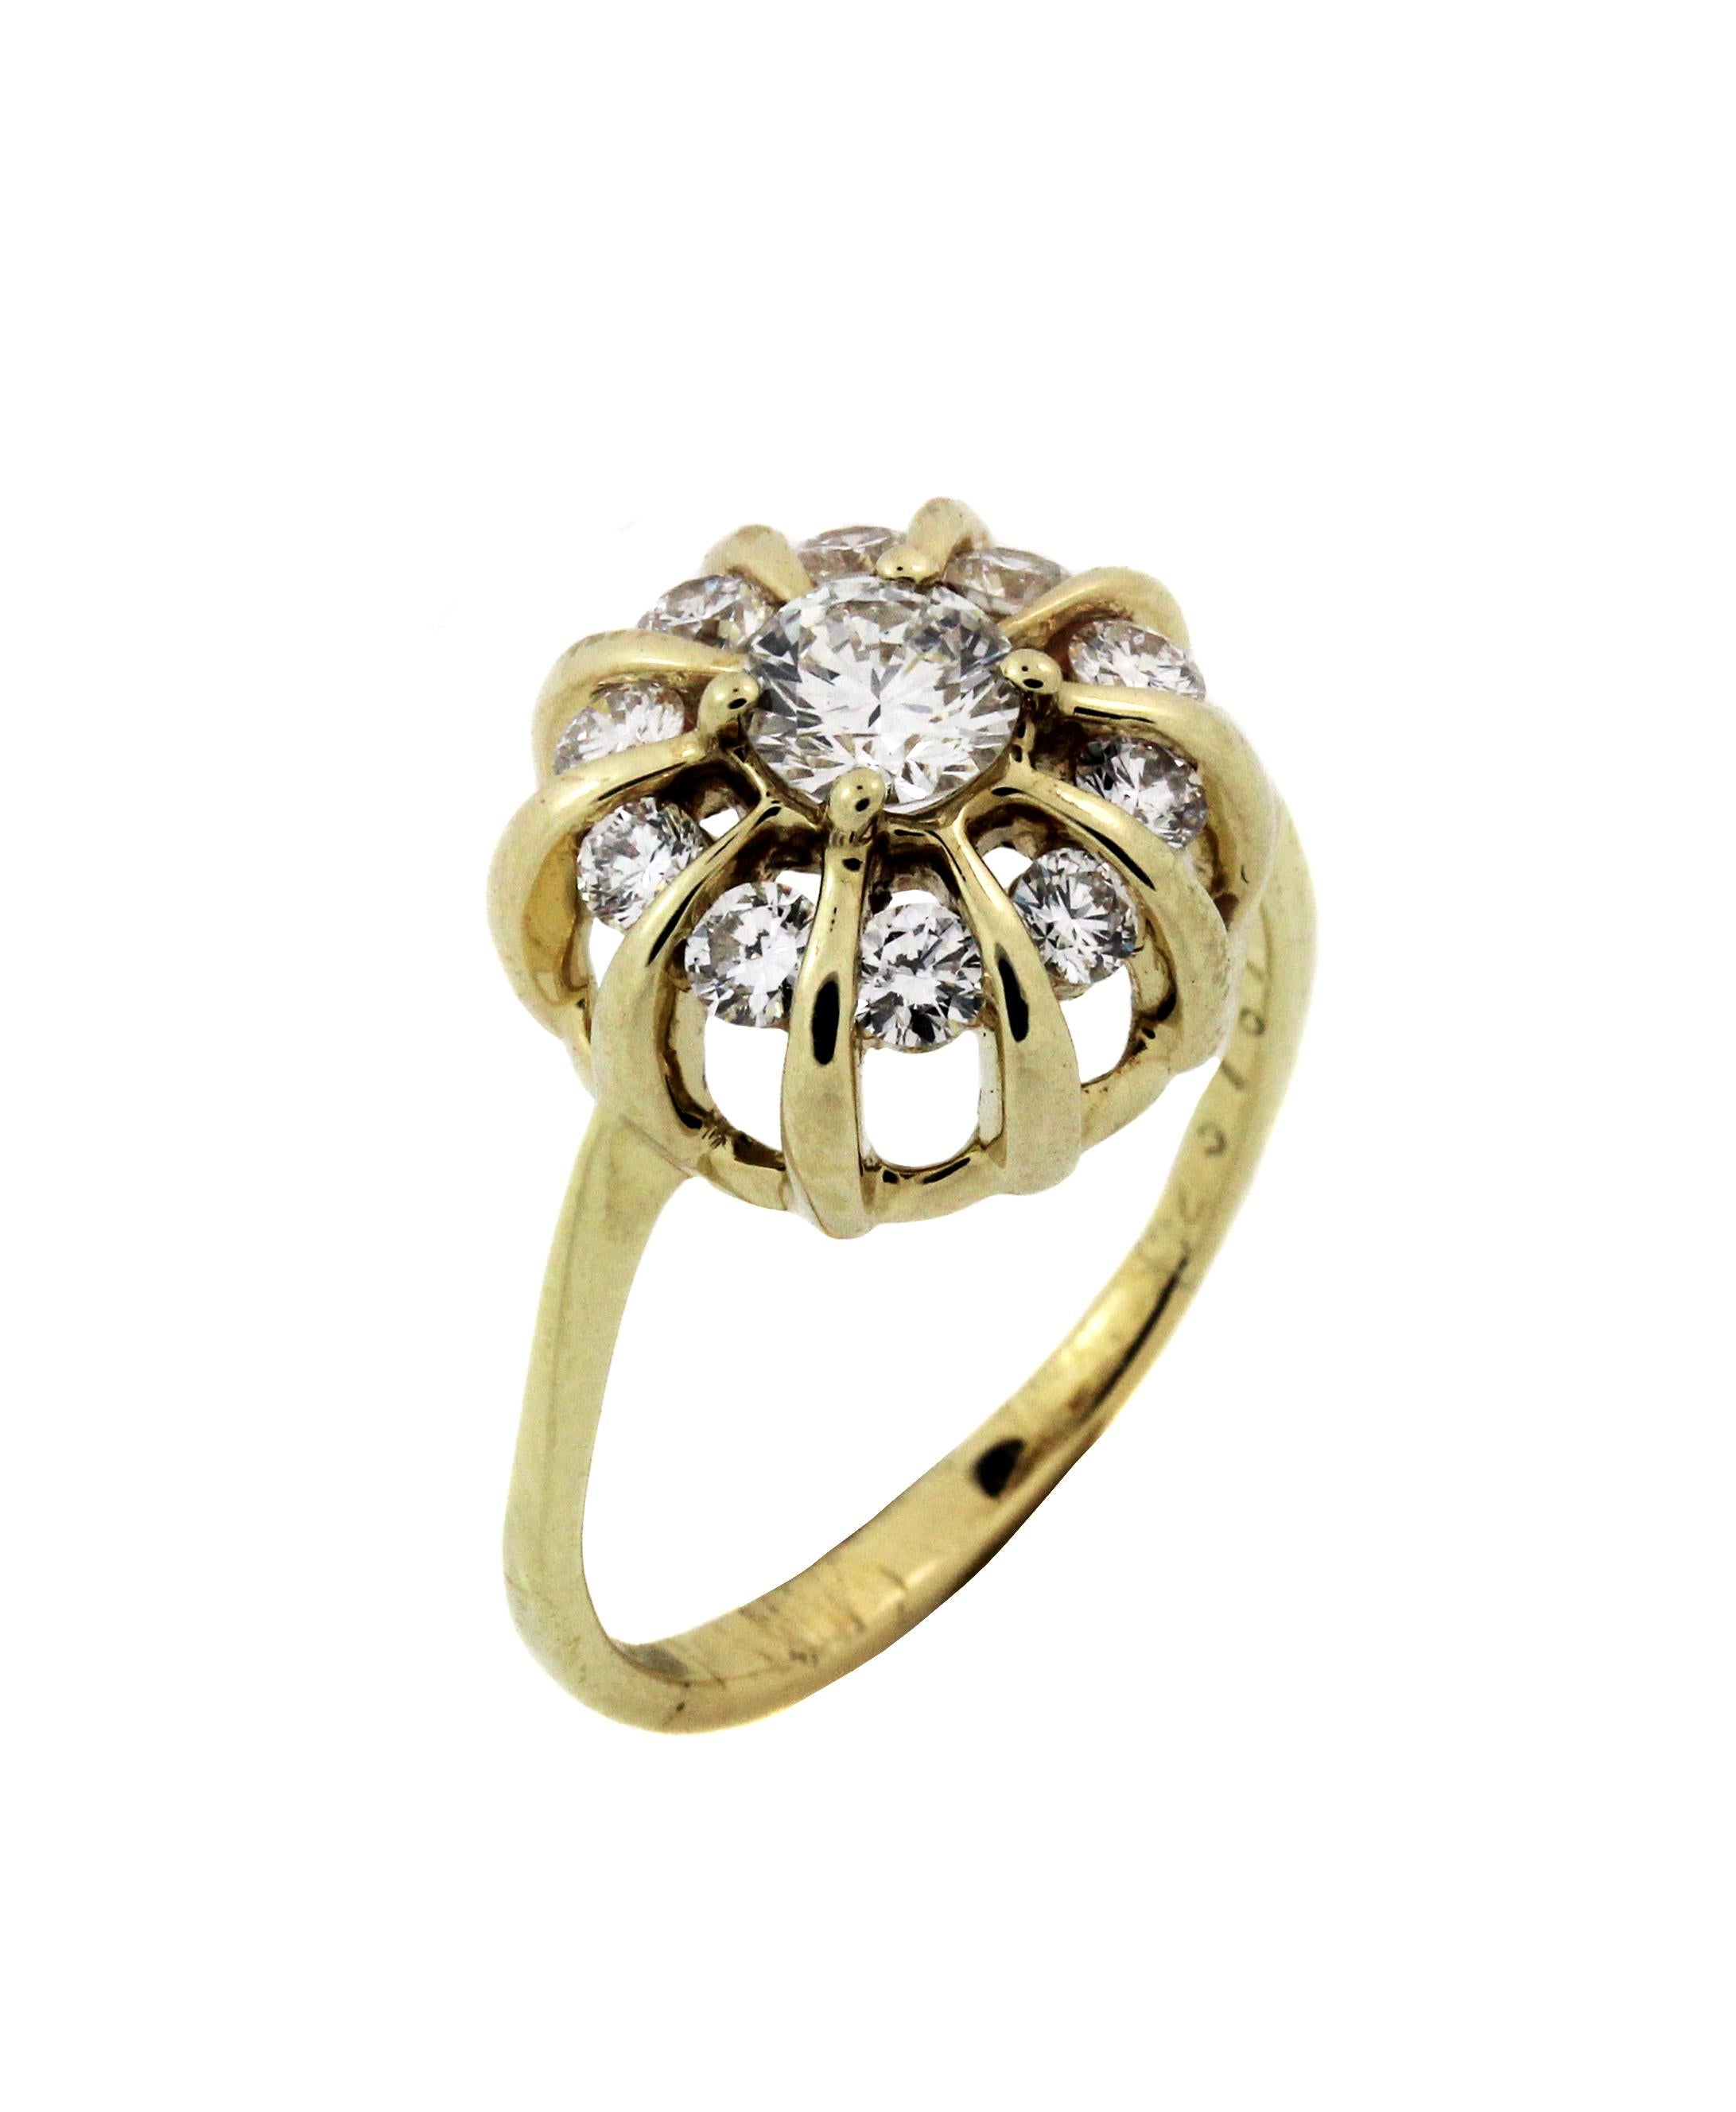 18K Yellow Gold and Diamond Ring by Jose Hess

Center has 0.35 carat G Color, VS2 clarity diamond
Center has another 0.50 carat G color VS clarity diamonds surrounding.

Face is 12mm (0.47 inch) in width

Band is 1.5 mm thick.

Signed Jose Hess.